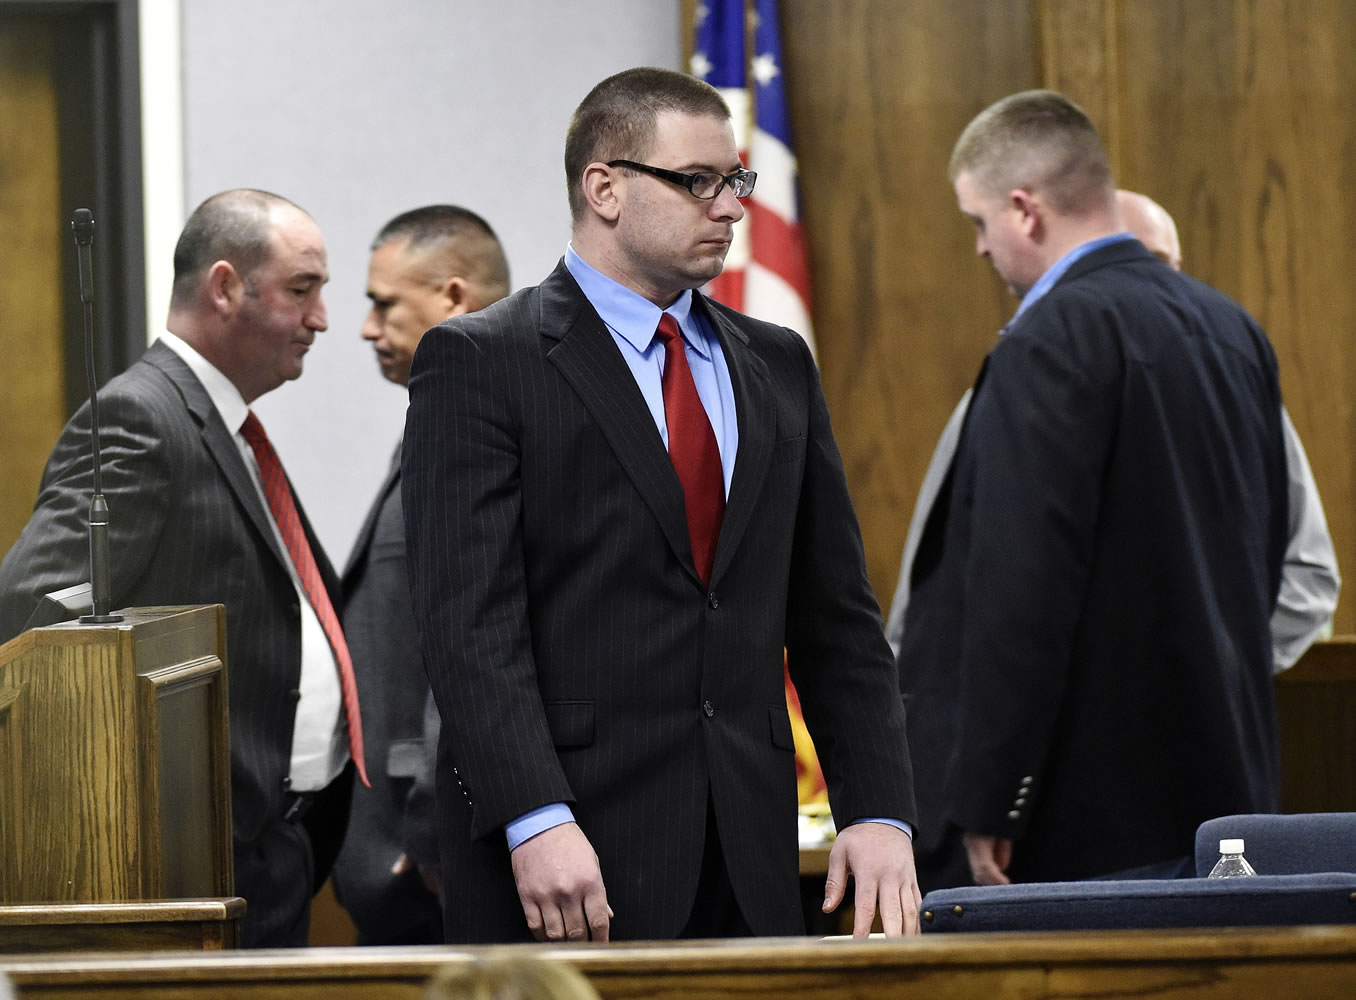 Former Marine Cpl. Eddie Ray Routh stands during his capital murder trial at the Erath County, Donald R. Jones Justice Center in Stephenville Texas, on Tuesday, Feb. 24, 2015.